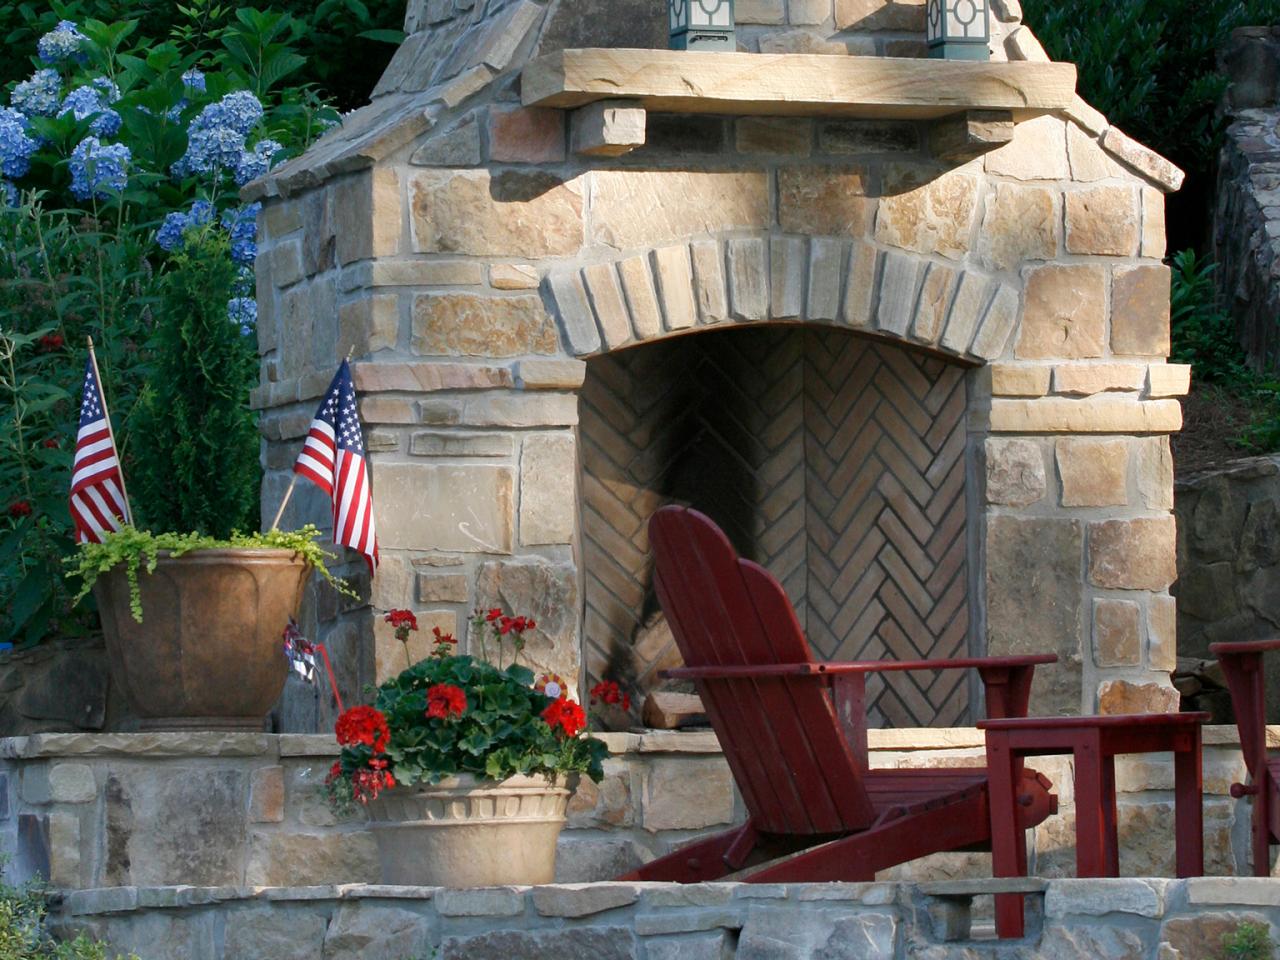 How To Choose An Outdoor Fireplace?